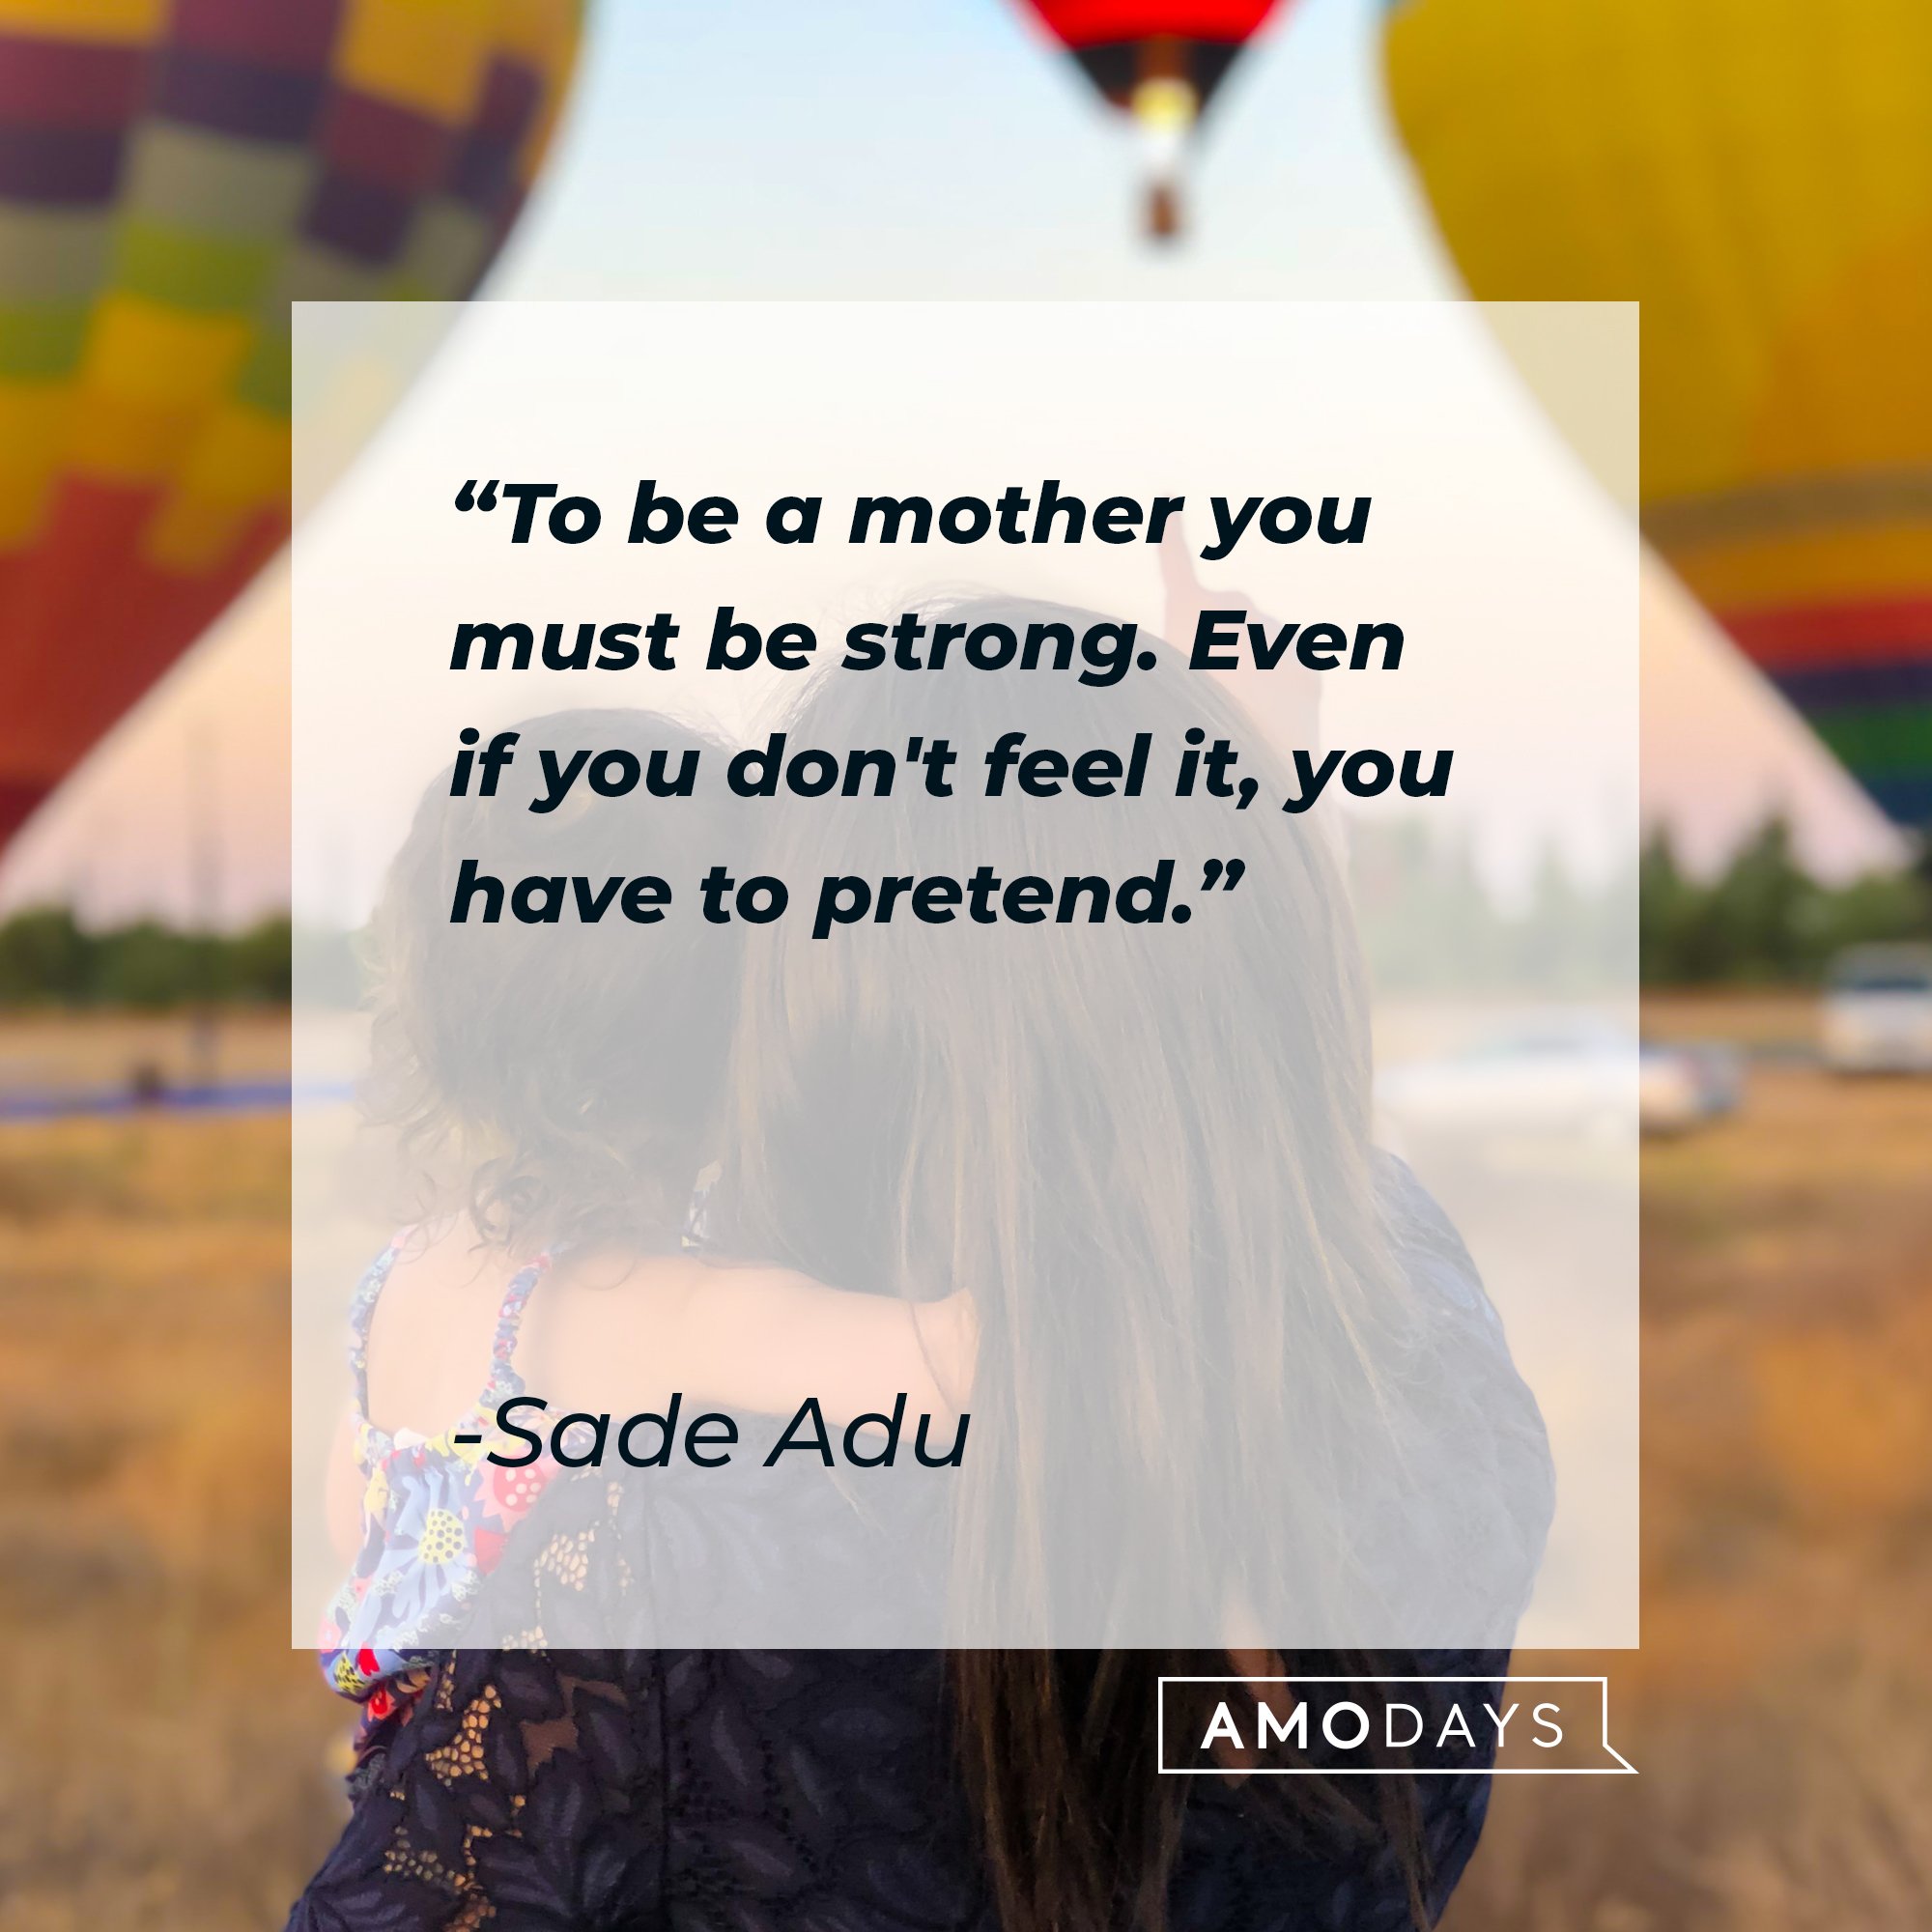 Sade Adu's quote: "To be a mother you must be strong. Even if you don't feel it, you have to pretend." | Image: AmoDays